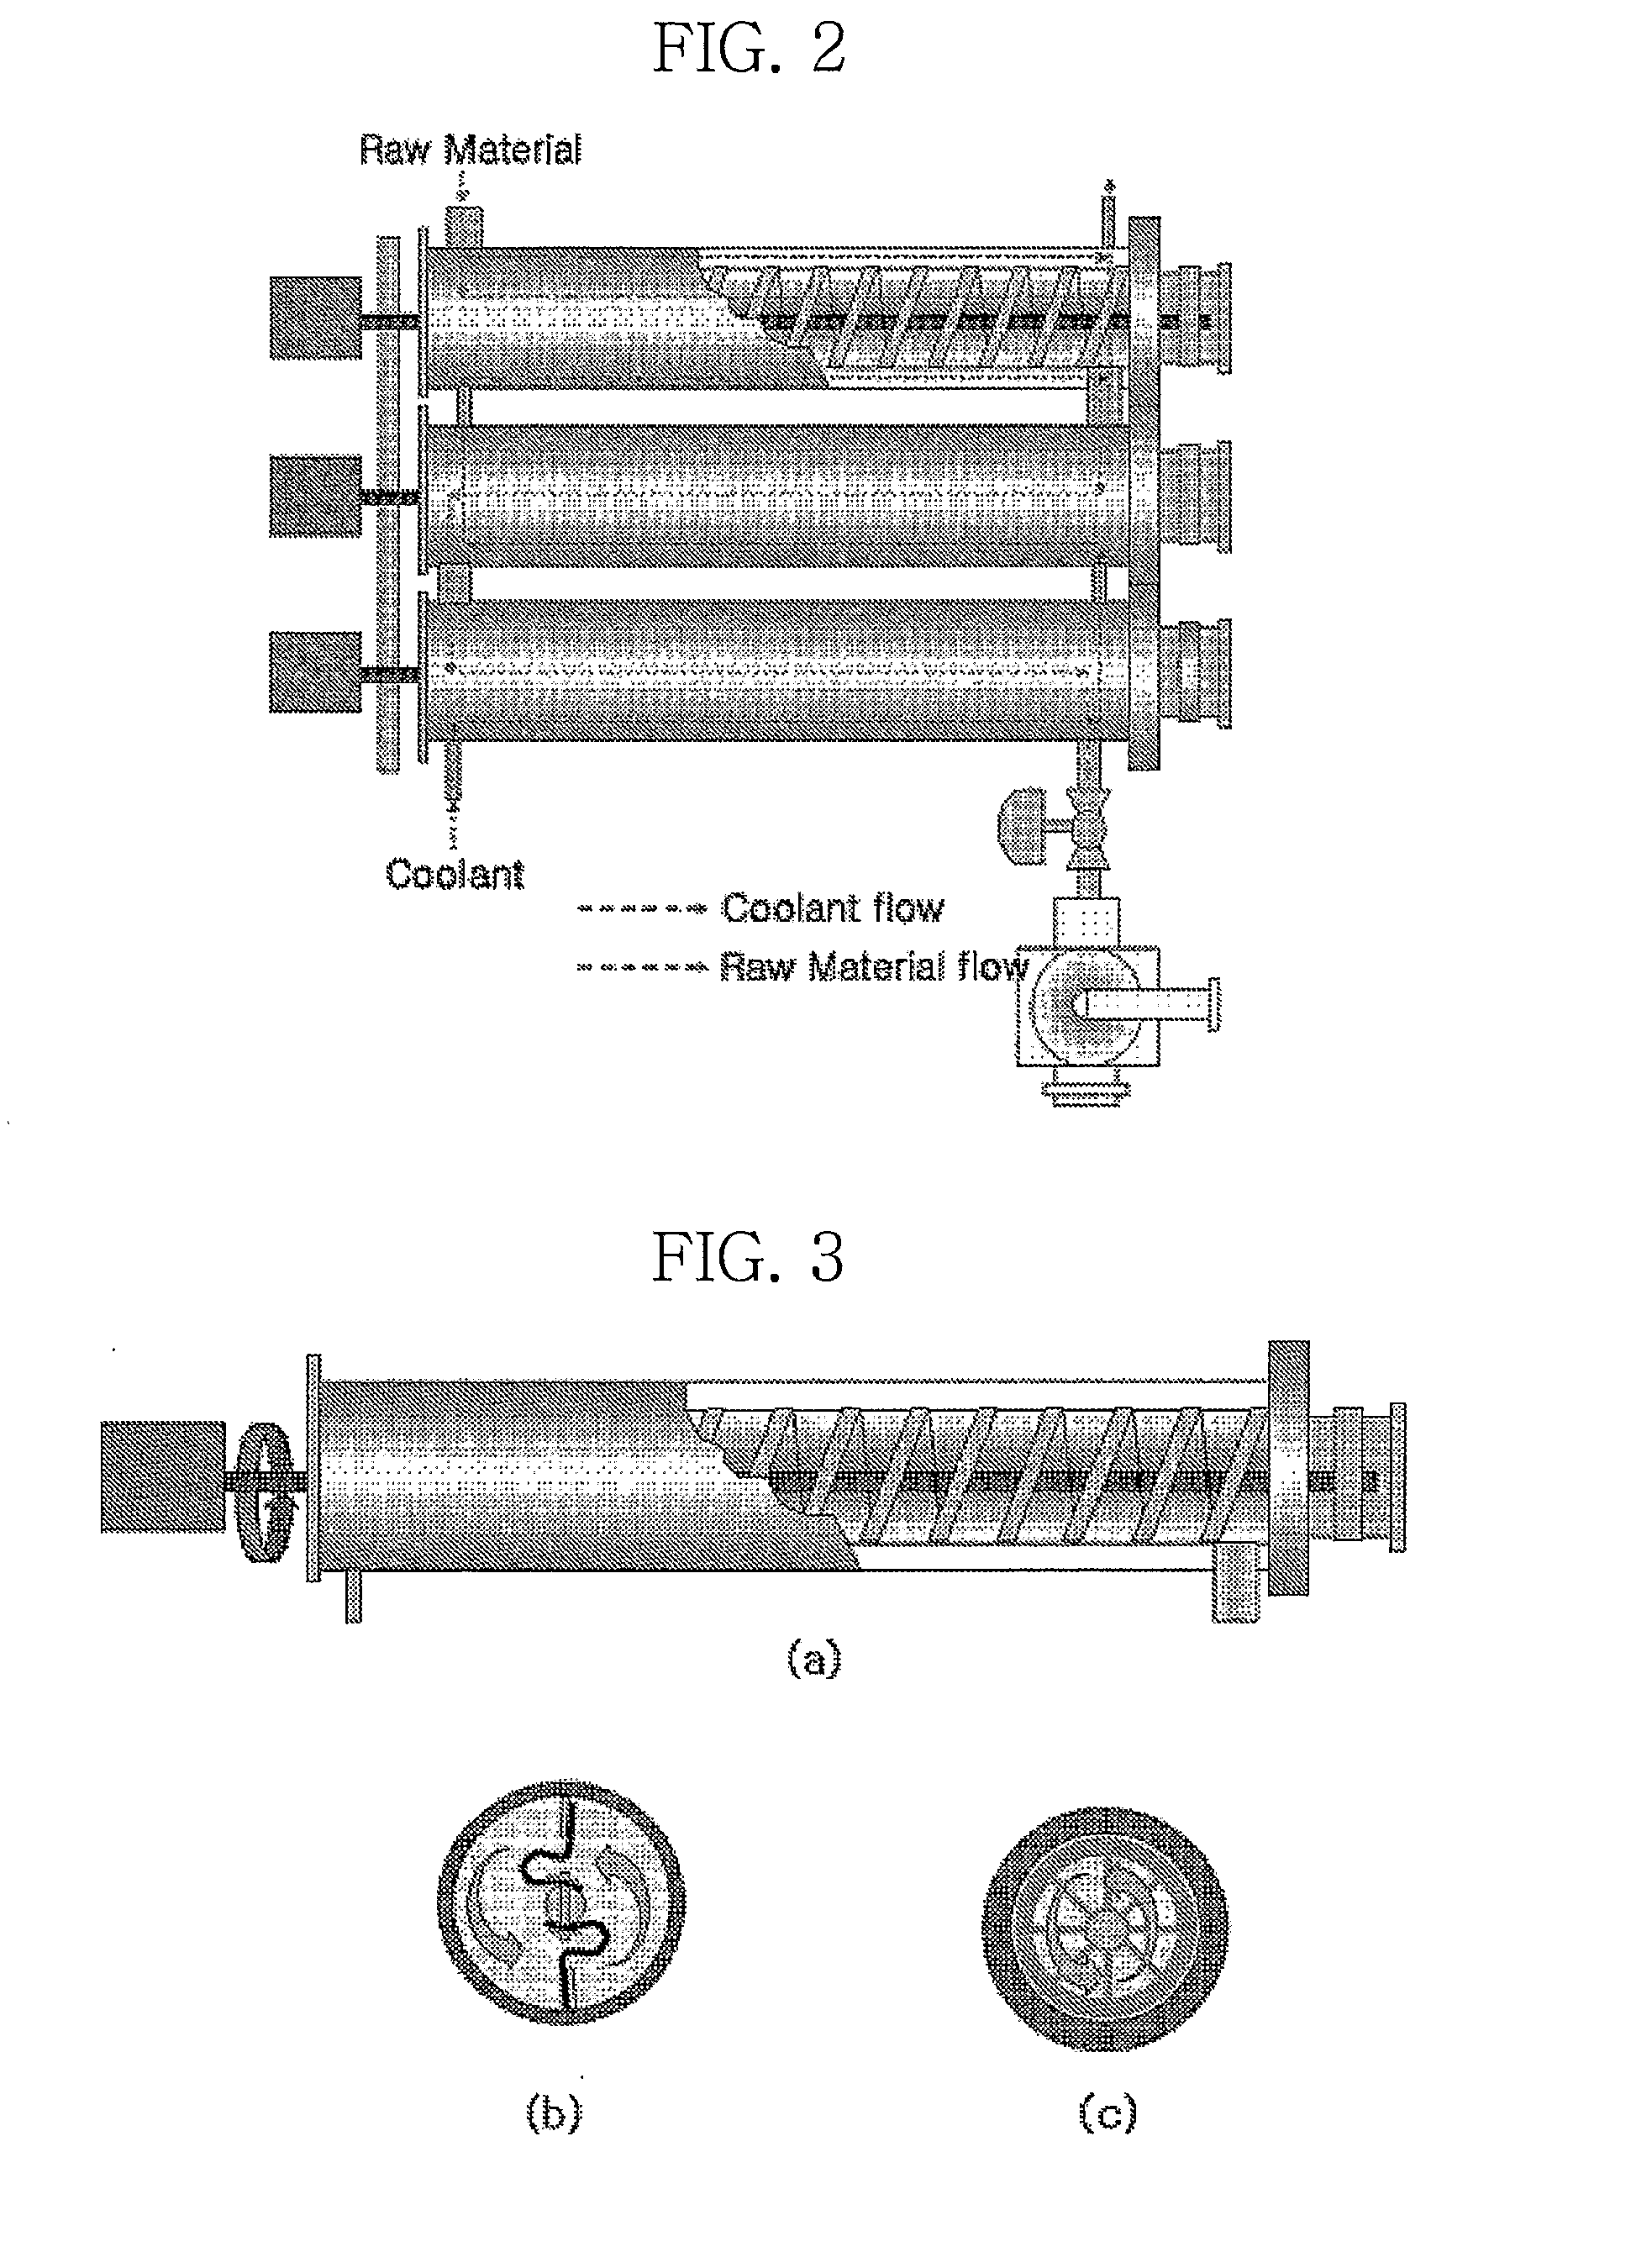 Method and System for Separation and Purification of High-Purity 2,6-Dimethylnaphthalene by Continuous Crystallization